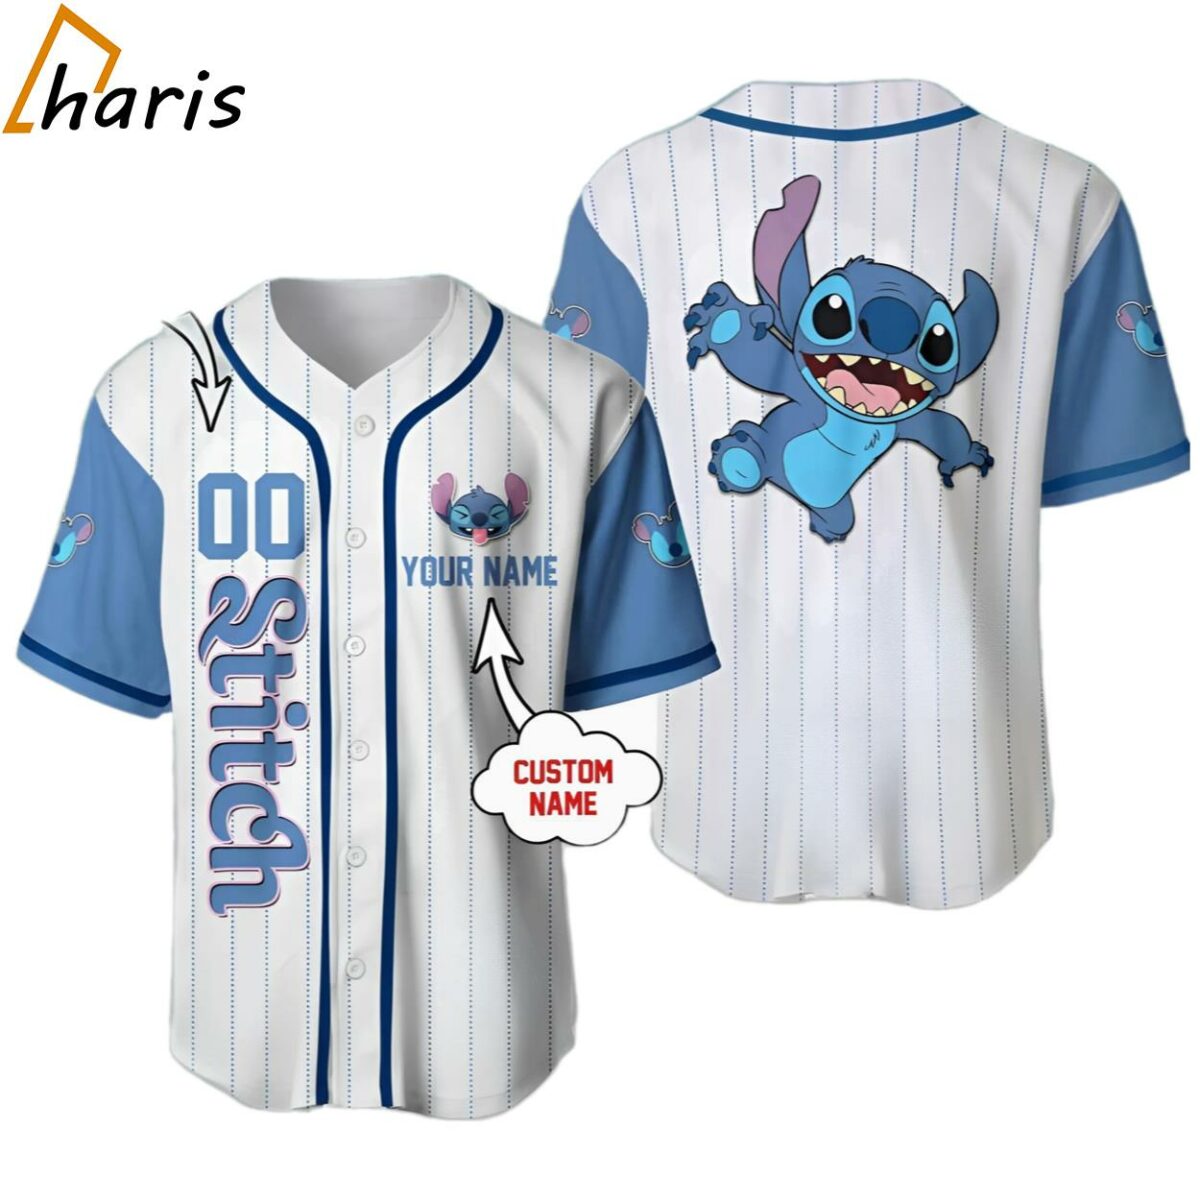 Lilo Stitch Baseball Jersey Inspired Design for Fans jersey jersey